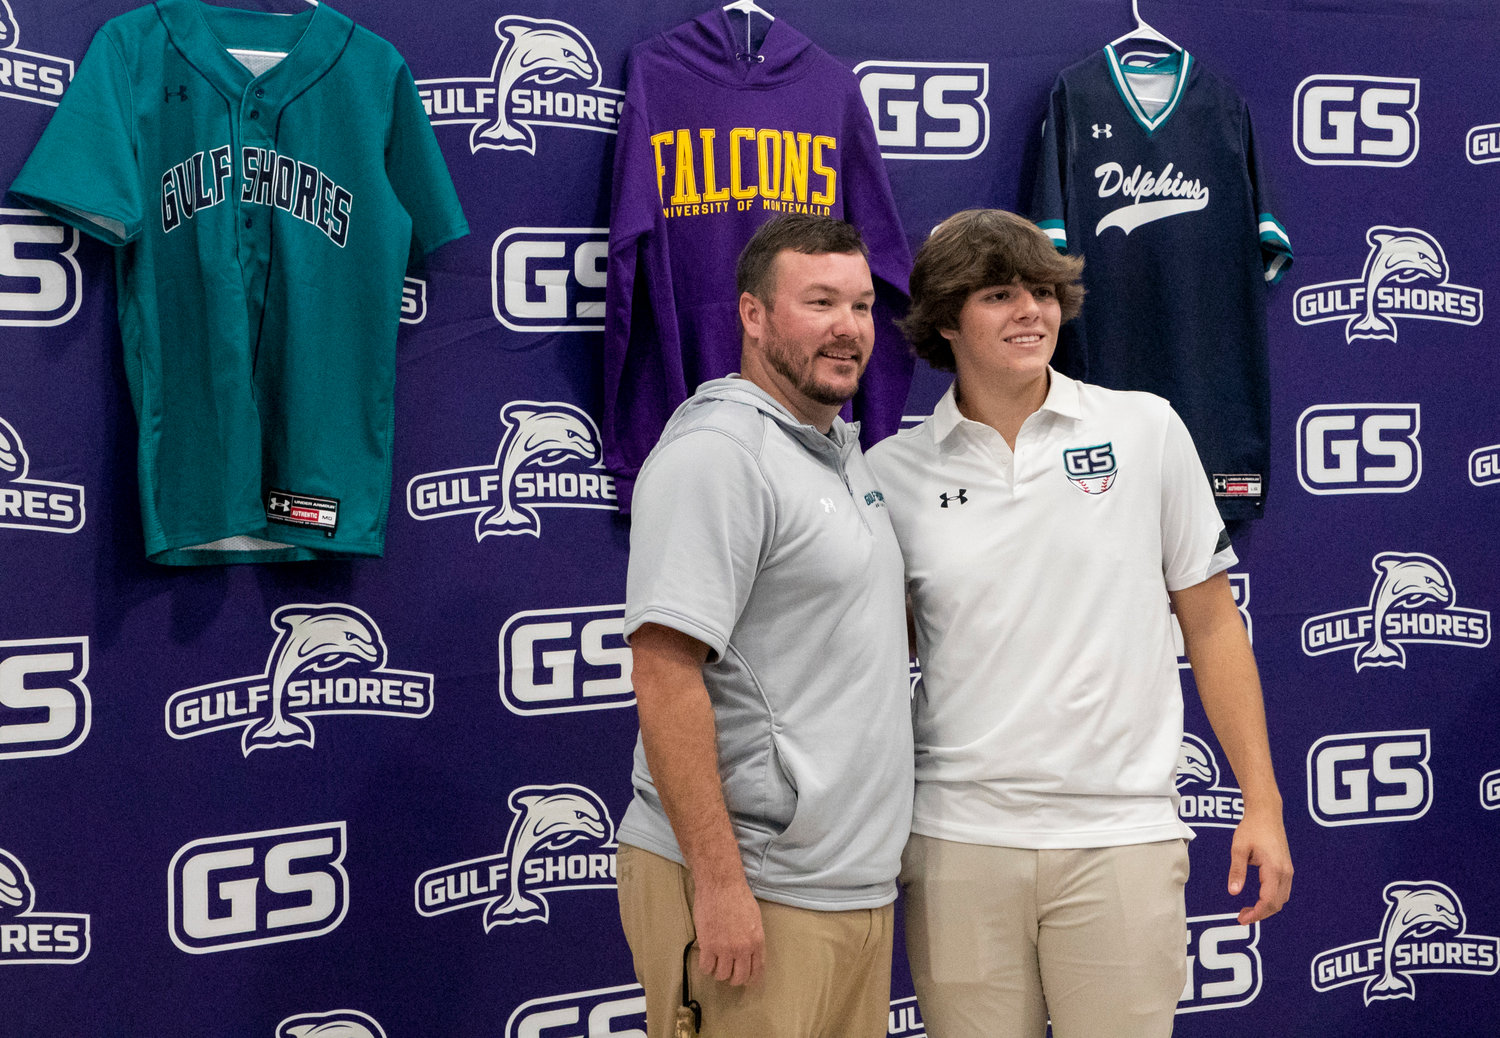 Gulf Shores head baseball coach Chris Jacks poses for a picture with catcher Dominic Maldet after he signed with the University of Montevallo’s baseball team after his time with the Dolphins. Maldet became the eighth baseball player to sign with a college in Jacks’ seven years at the helm.